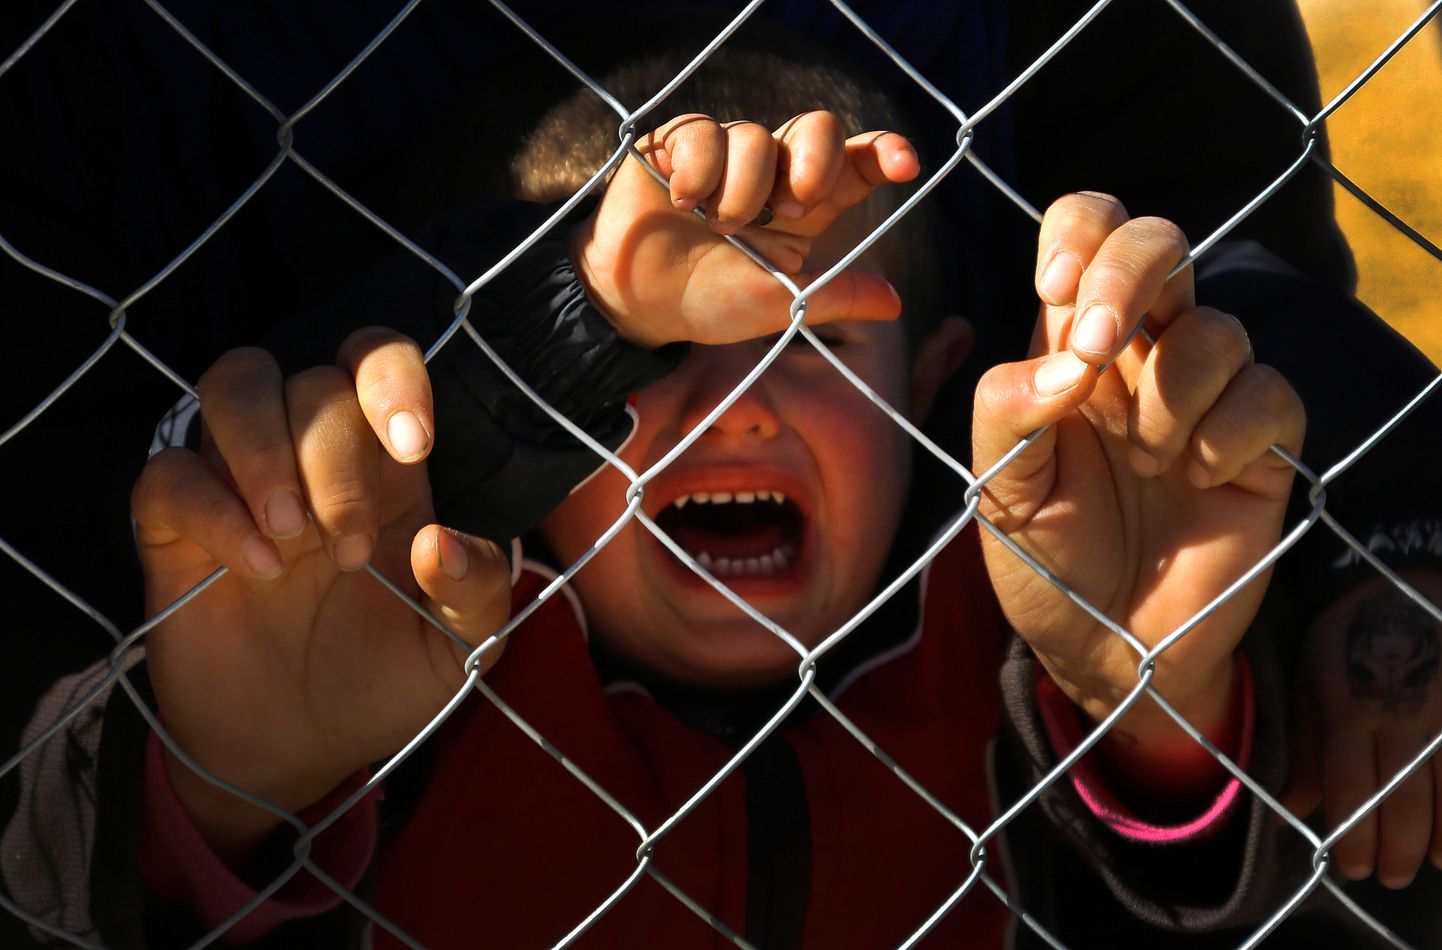 FILE PHOTO -  A Kurdish refugee child cries as he and others wait inside a fenced refugee camp to pay their last respects to a Kurdish fighter killed during the battle for Kobani against Islamic State, in the border town of Suruc, Sanliurfa province November 7, 2014.  REUTERS/Yannis Behrakis/File Photo